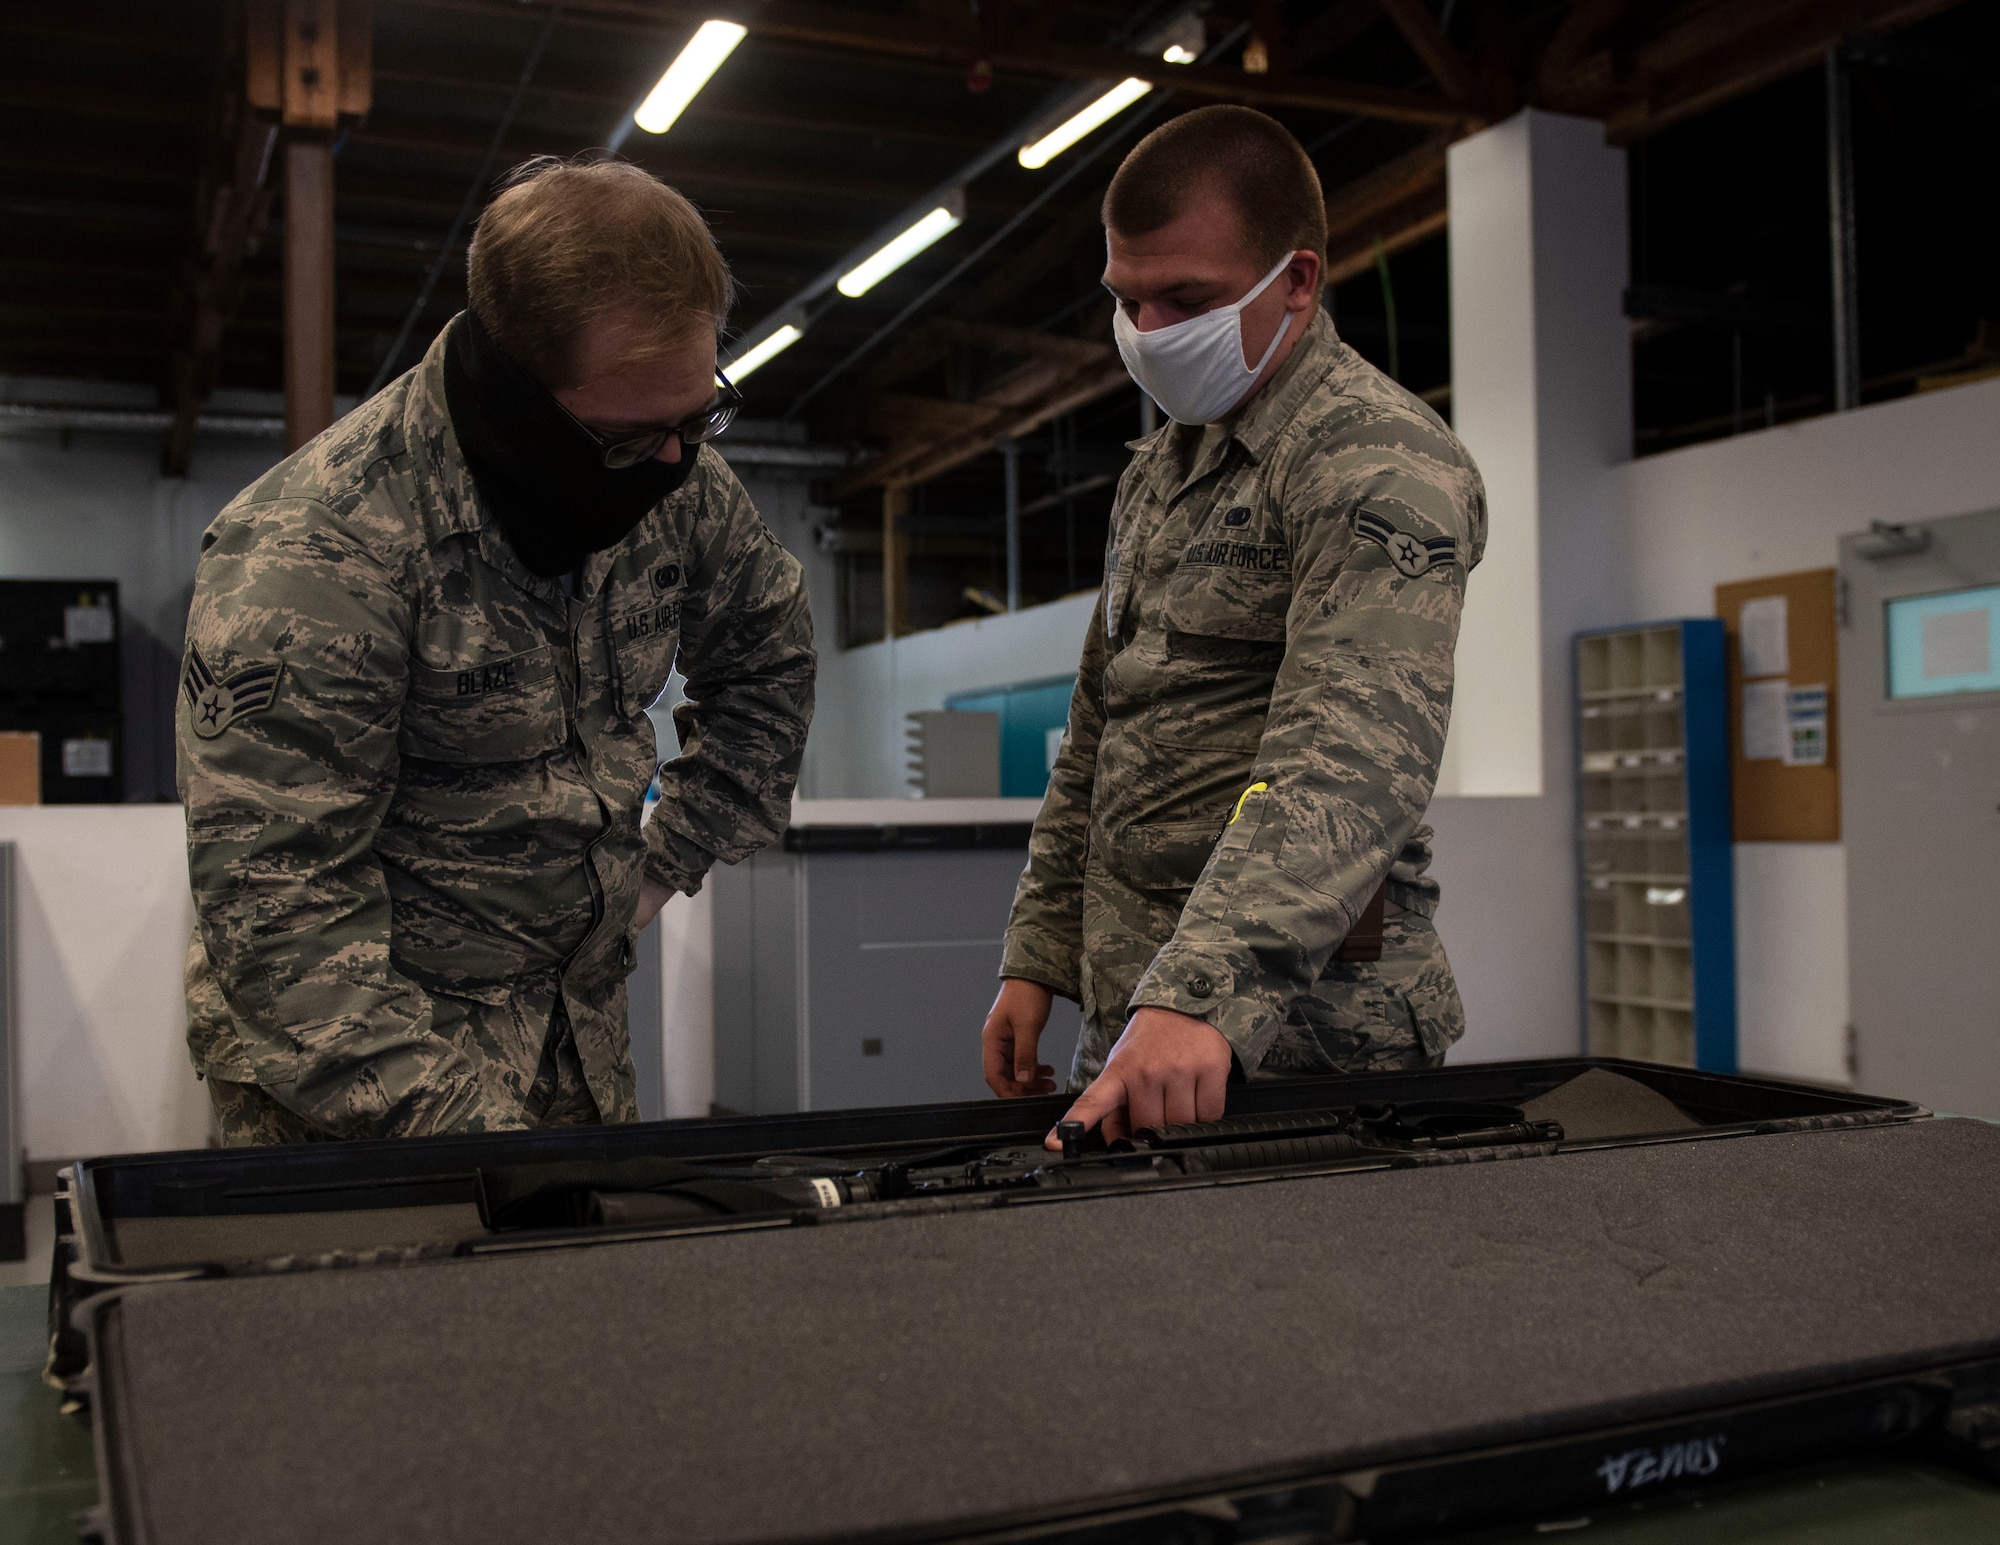 U.S. Air Force Senior Airman Michael Blaze, left, 52nd Logistics Readiness Squadron Individual Protective Equipment journeyman, and A1C Corbin Hanly, right, 52nd LRS IPE apprentice, demonstrate issuing a weapon, June 4, 2020, at Spangdahlem Air Base, Germany. The 52nd LRS IPE airmen responded to the COVID-19 pandemic by rapidly issuing protective face masks to Airmen stationed at the 52nd Fighter Wing and surrounding geographically separated units. (U.S. Air Force photo by Senior Airman Melody W. Howley)